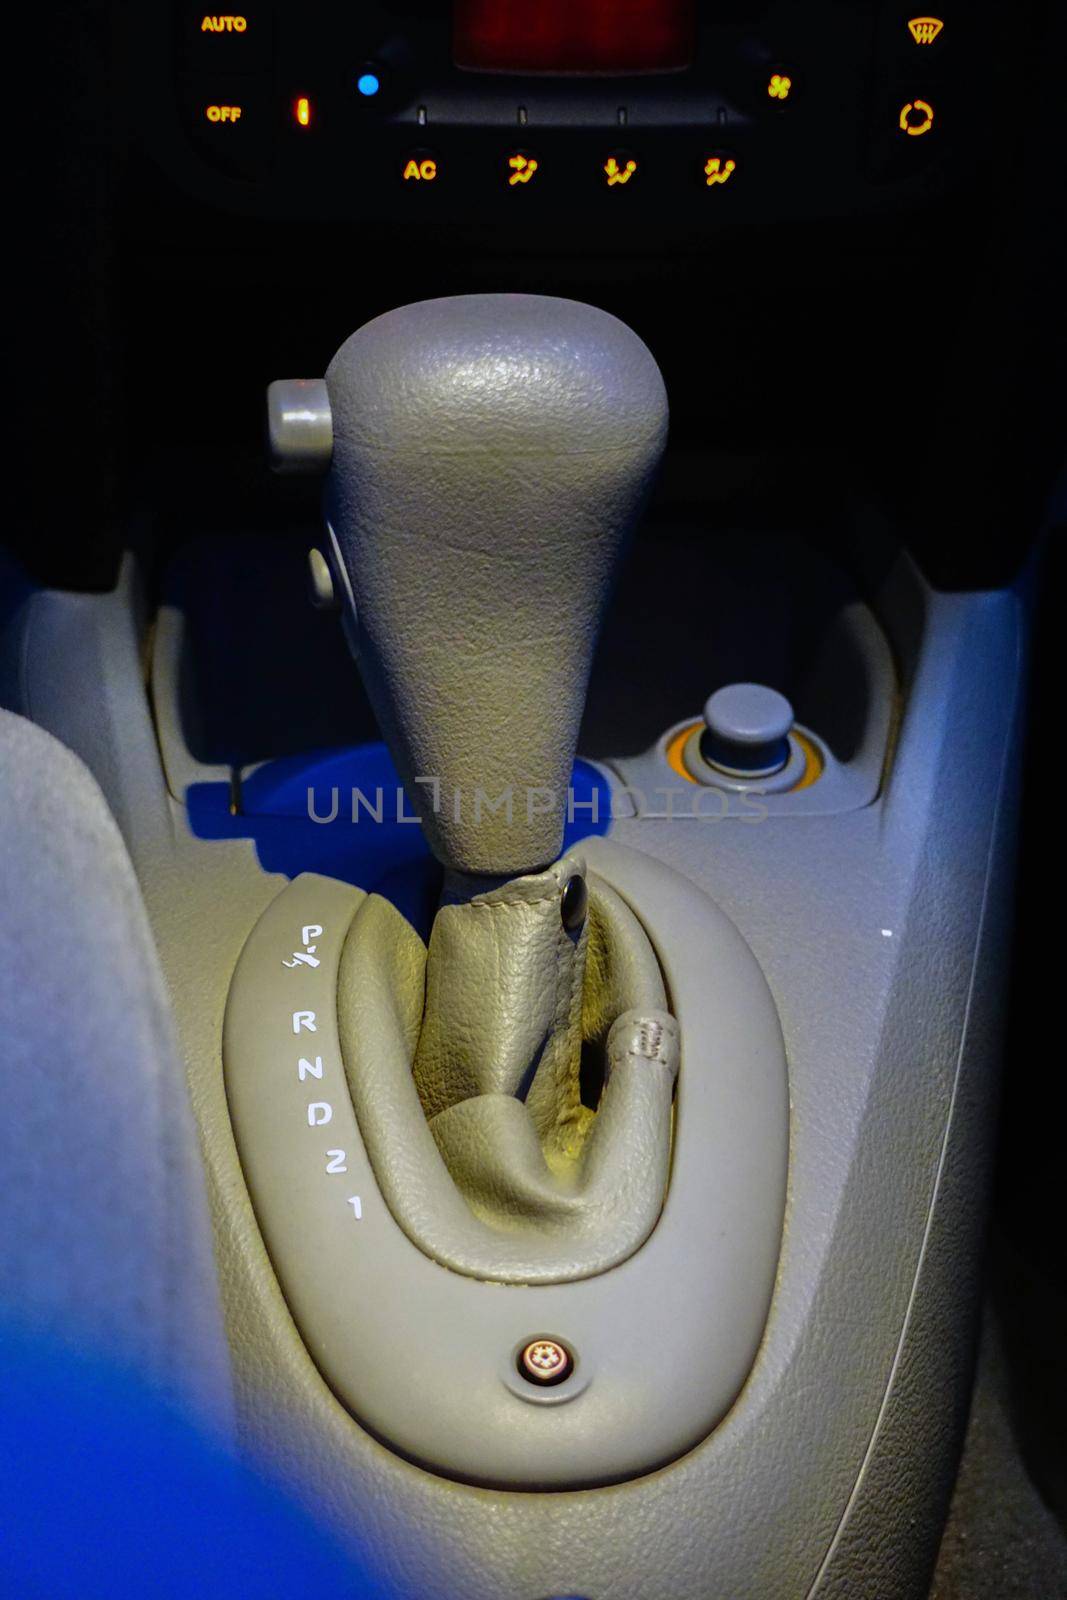 Automatic gear shift lever of a car